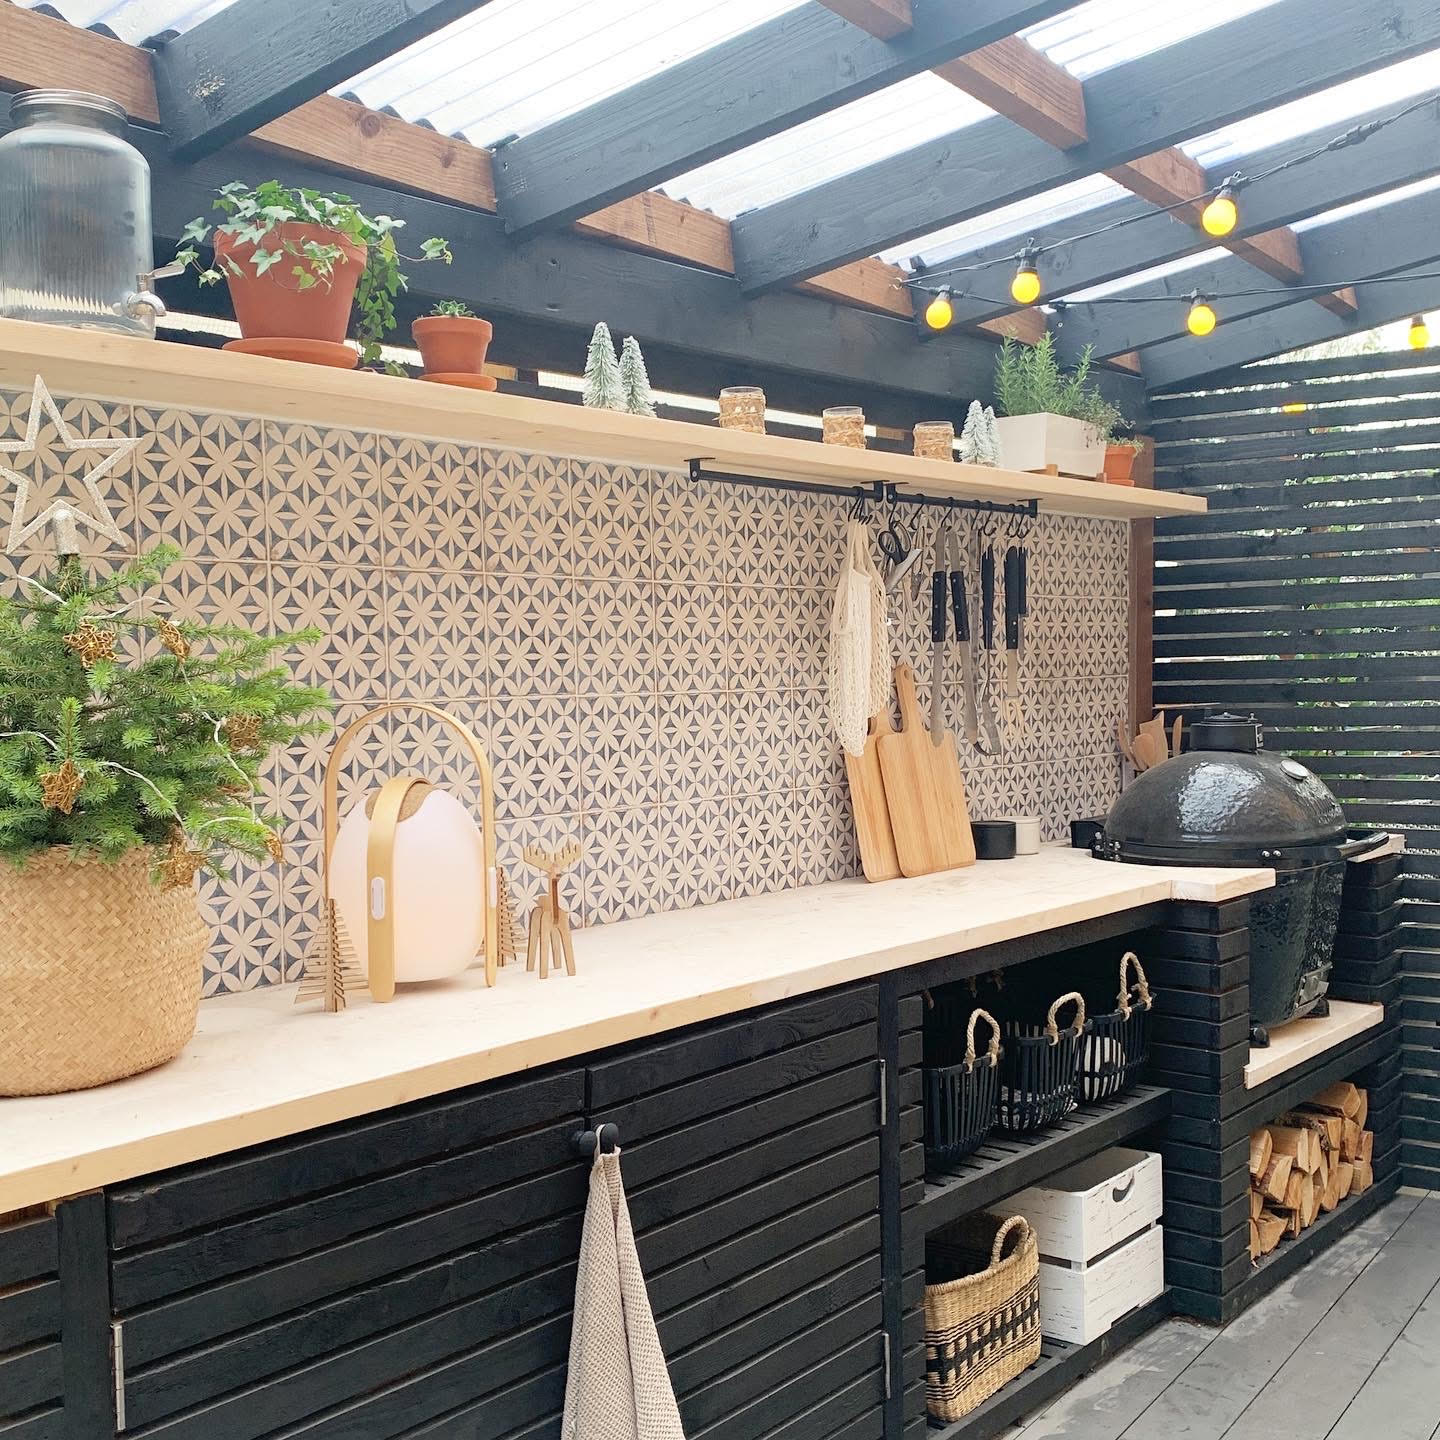 18 Outdoor Kitchen Ideas With Photos of Inspiring Spaces ...